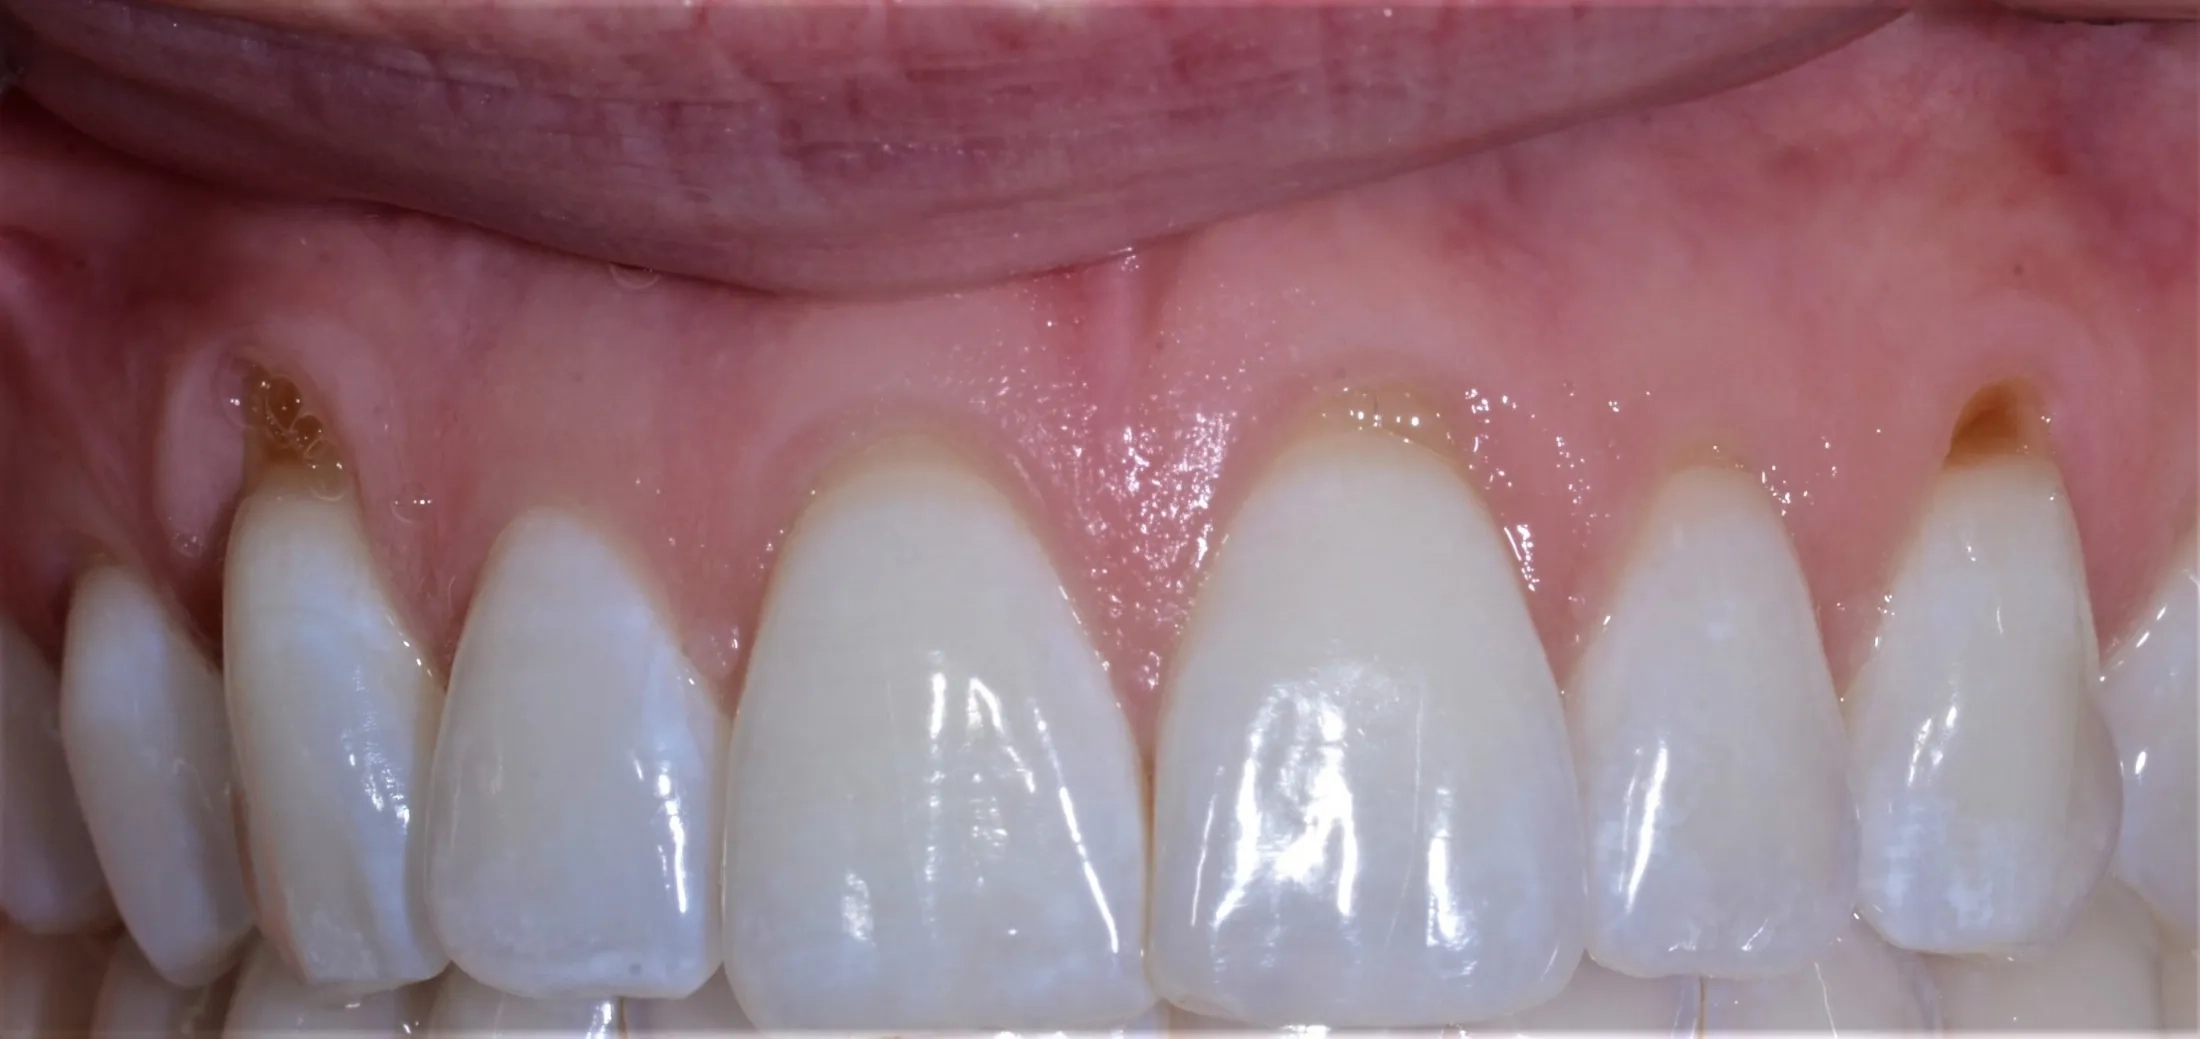 Specific pre-operative condition of gums needing grafting care.